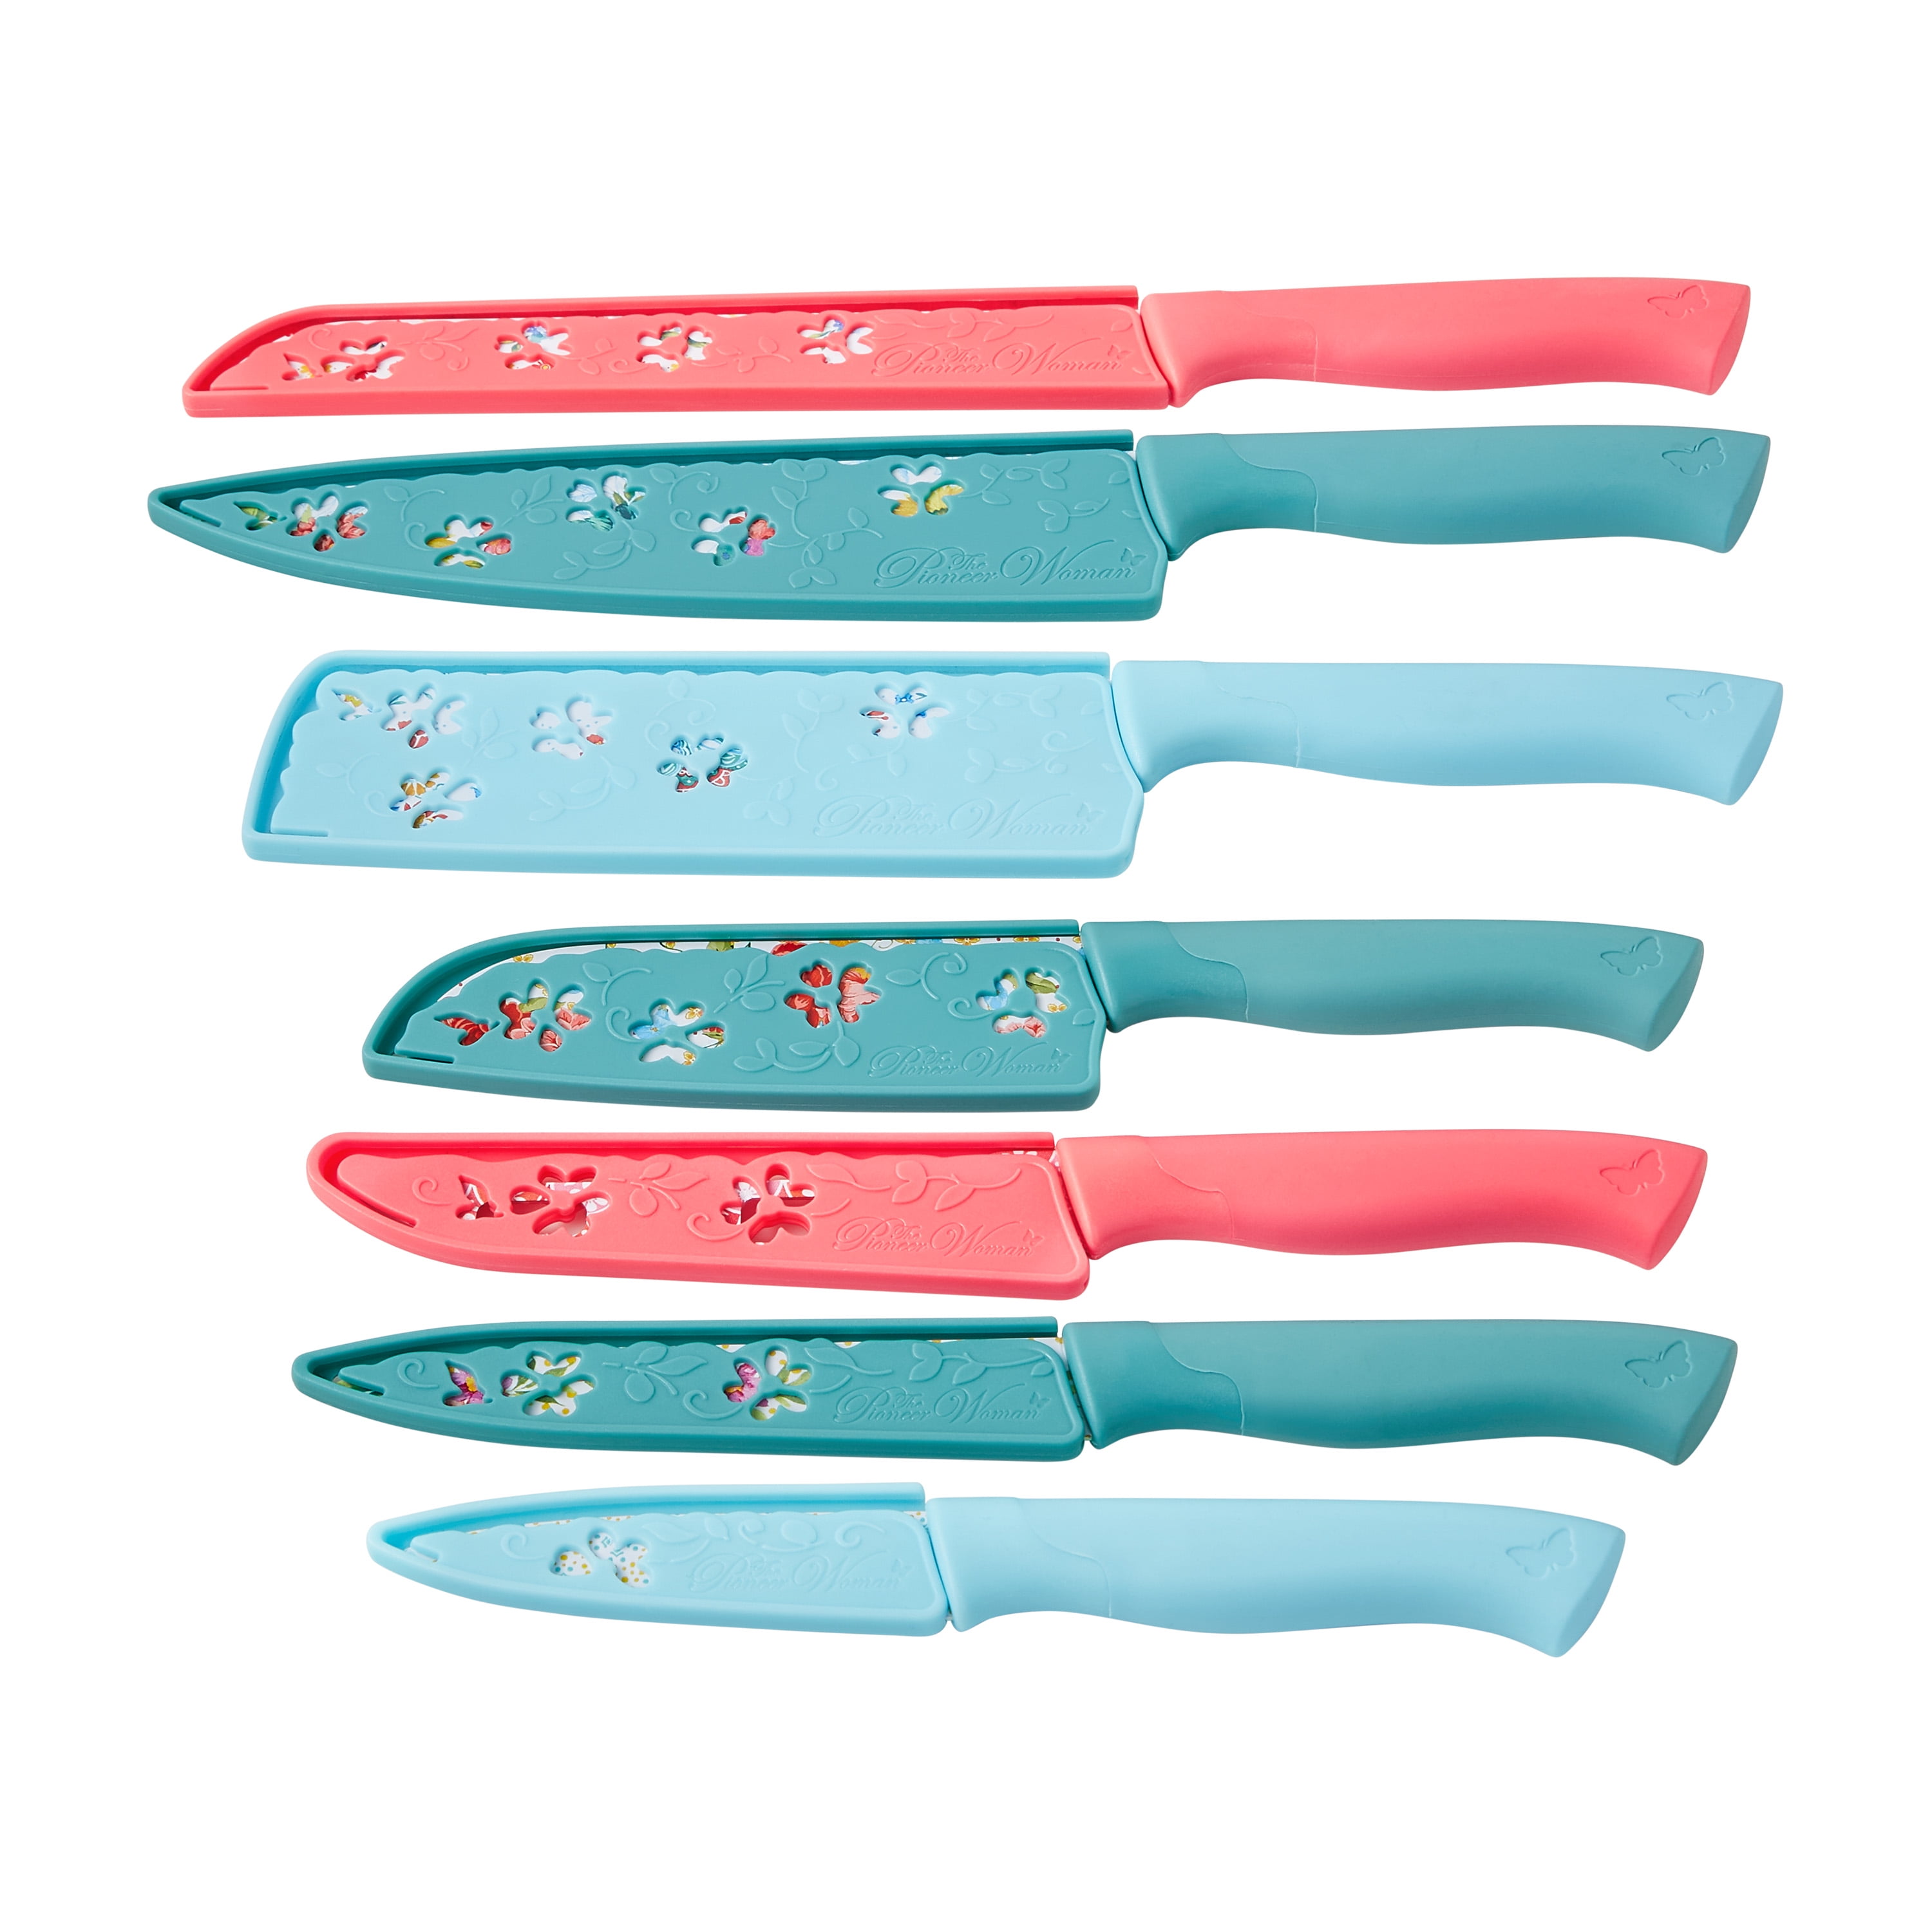 Pioneer Woman BLOOMING BOUQUET 8-PC Mini Kitchen Silicon Tools and